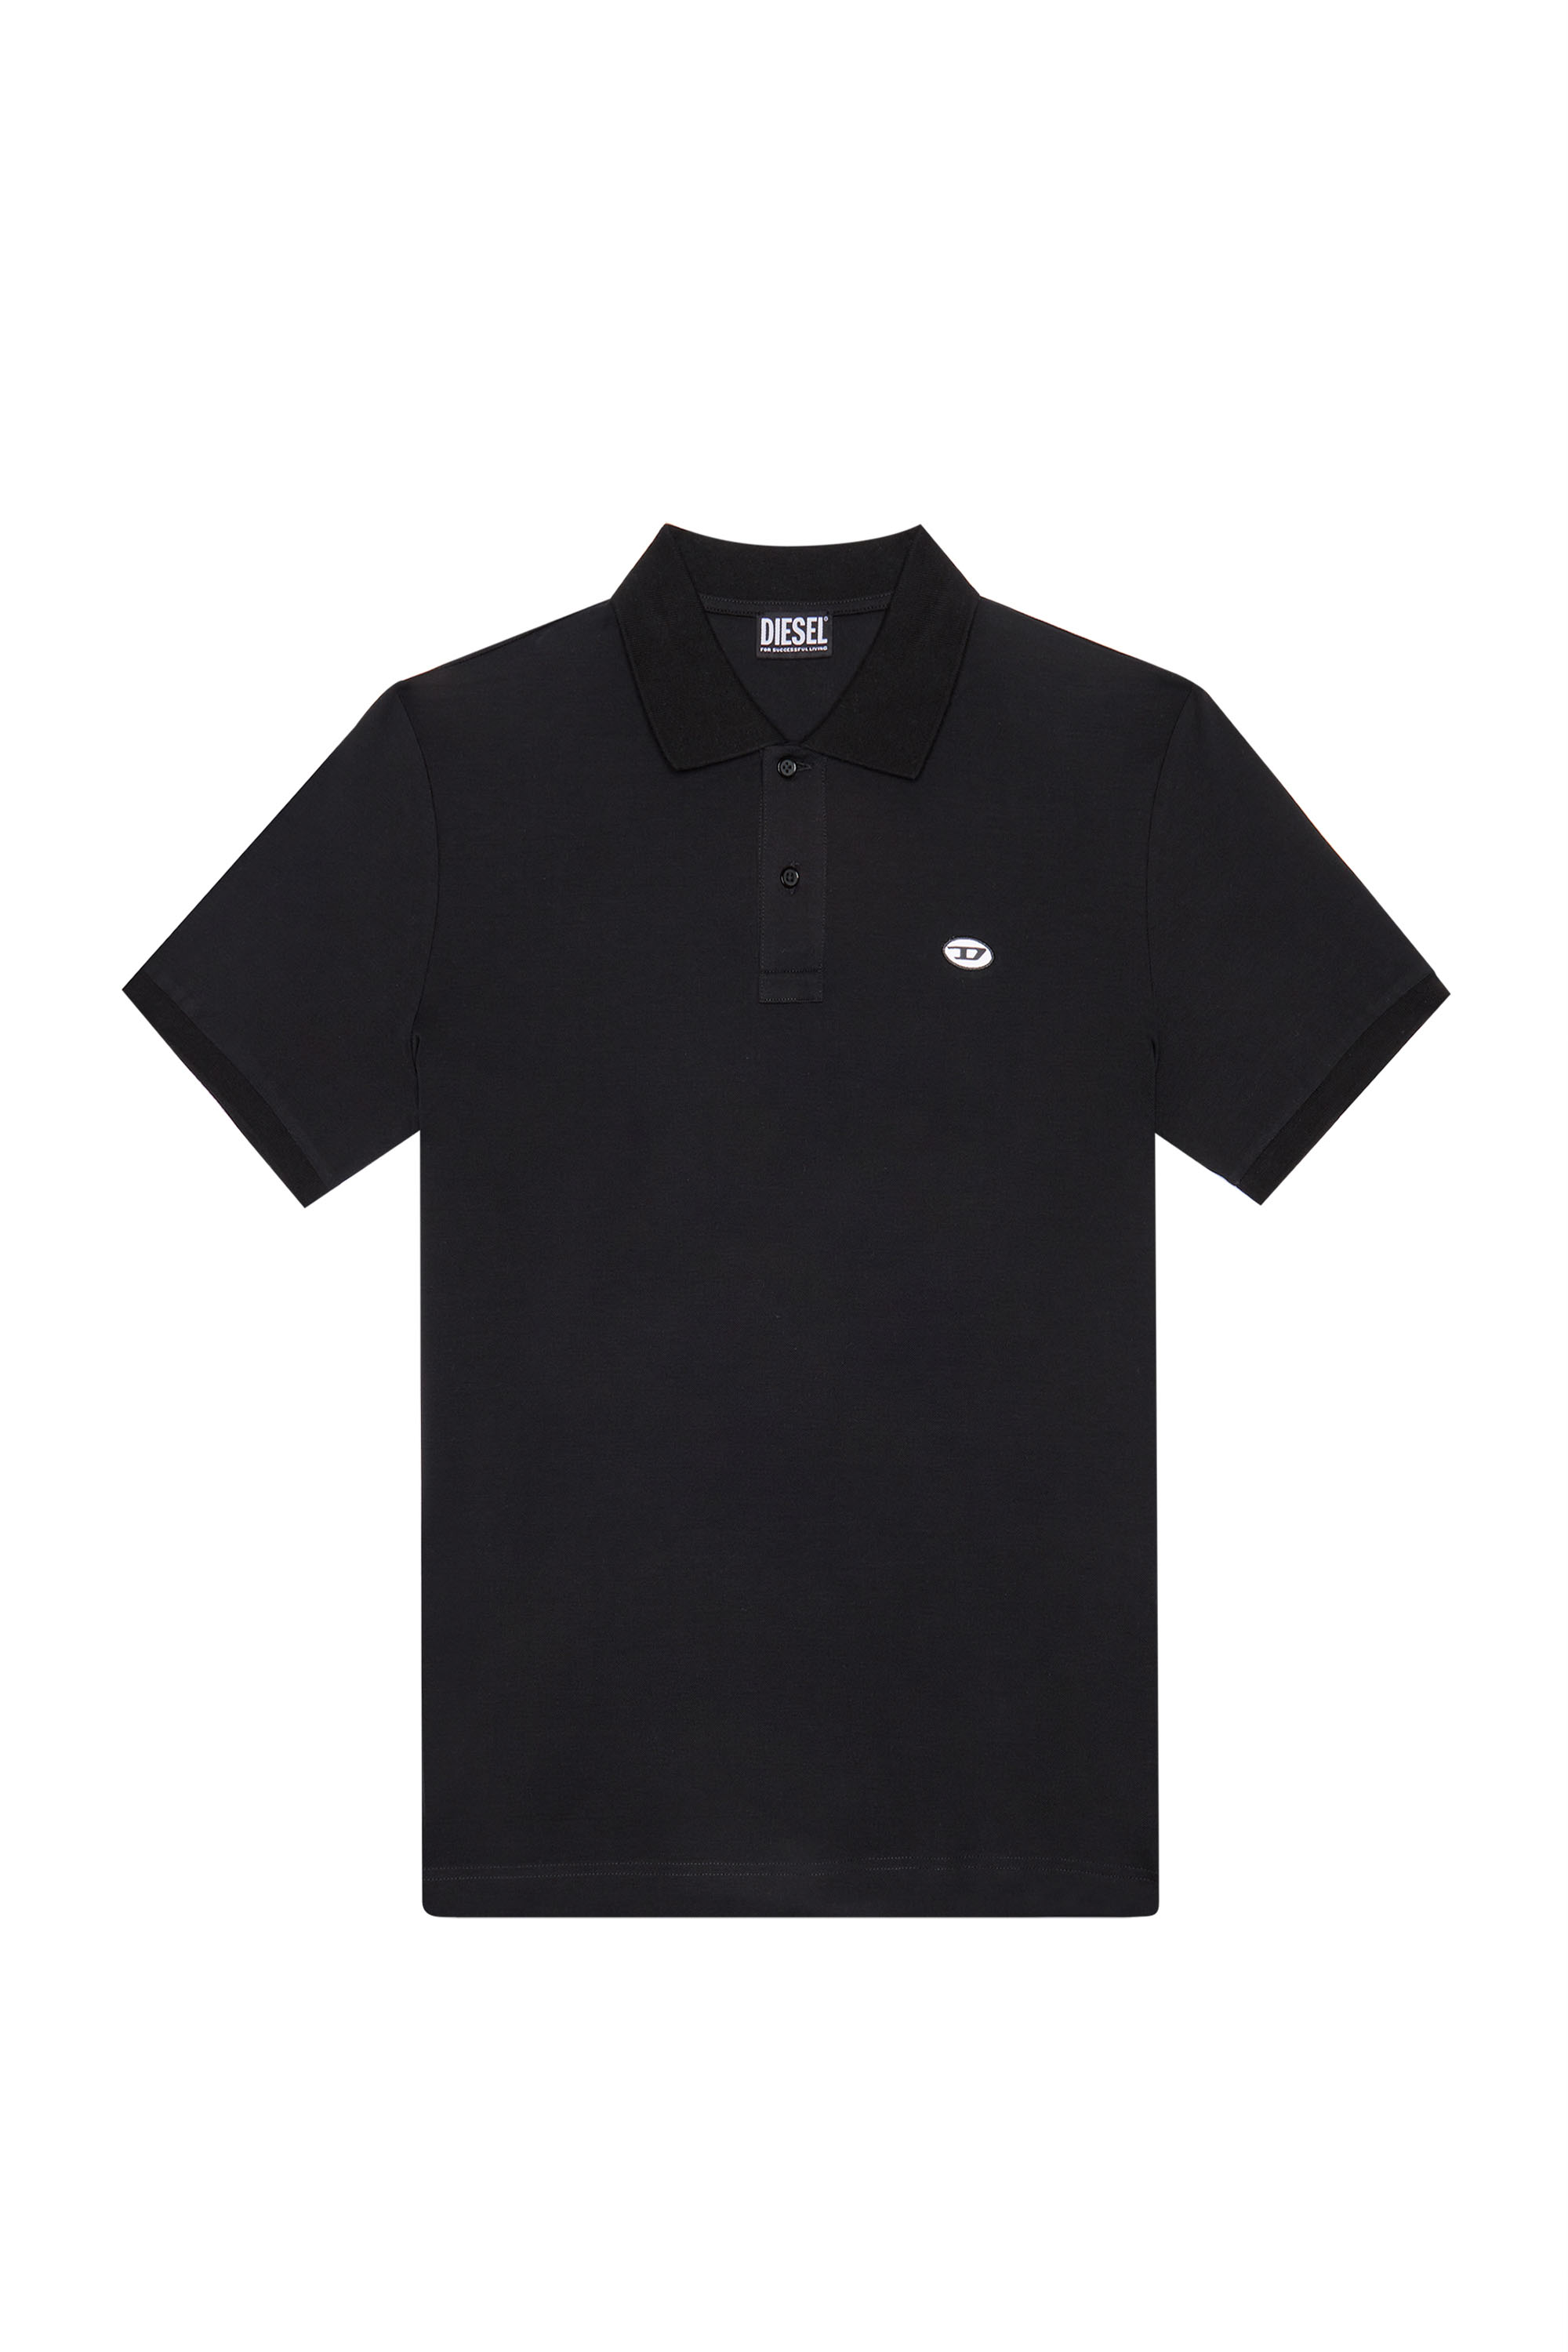 Diesel - T-SMITH-DOVAL-PJ, Male Polo shirt with oval D patch in Black - Image 5